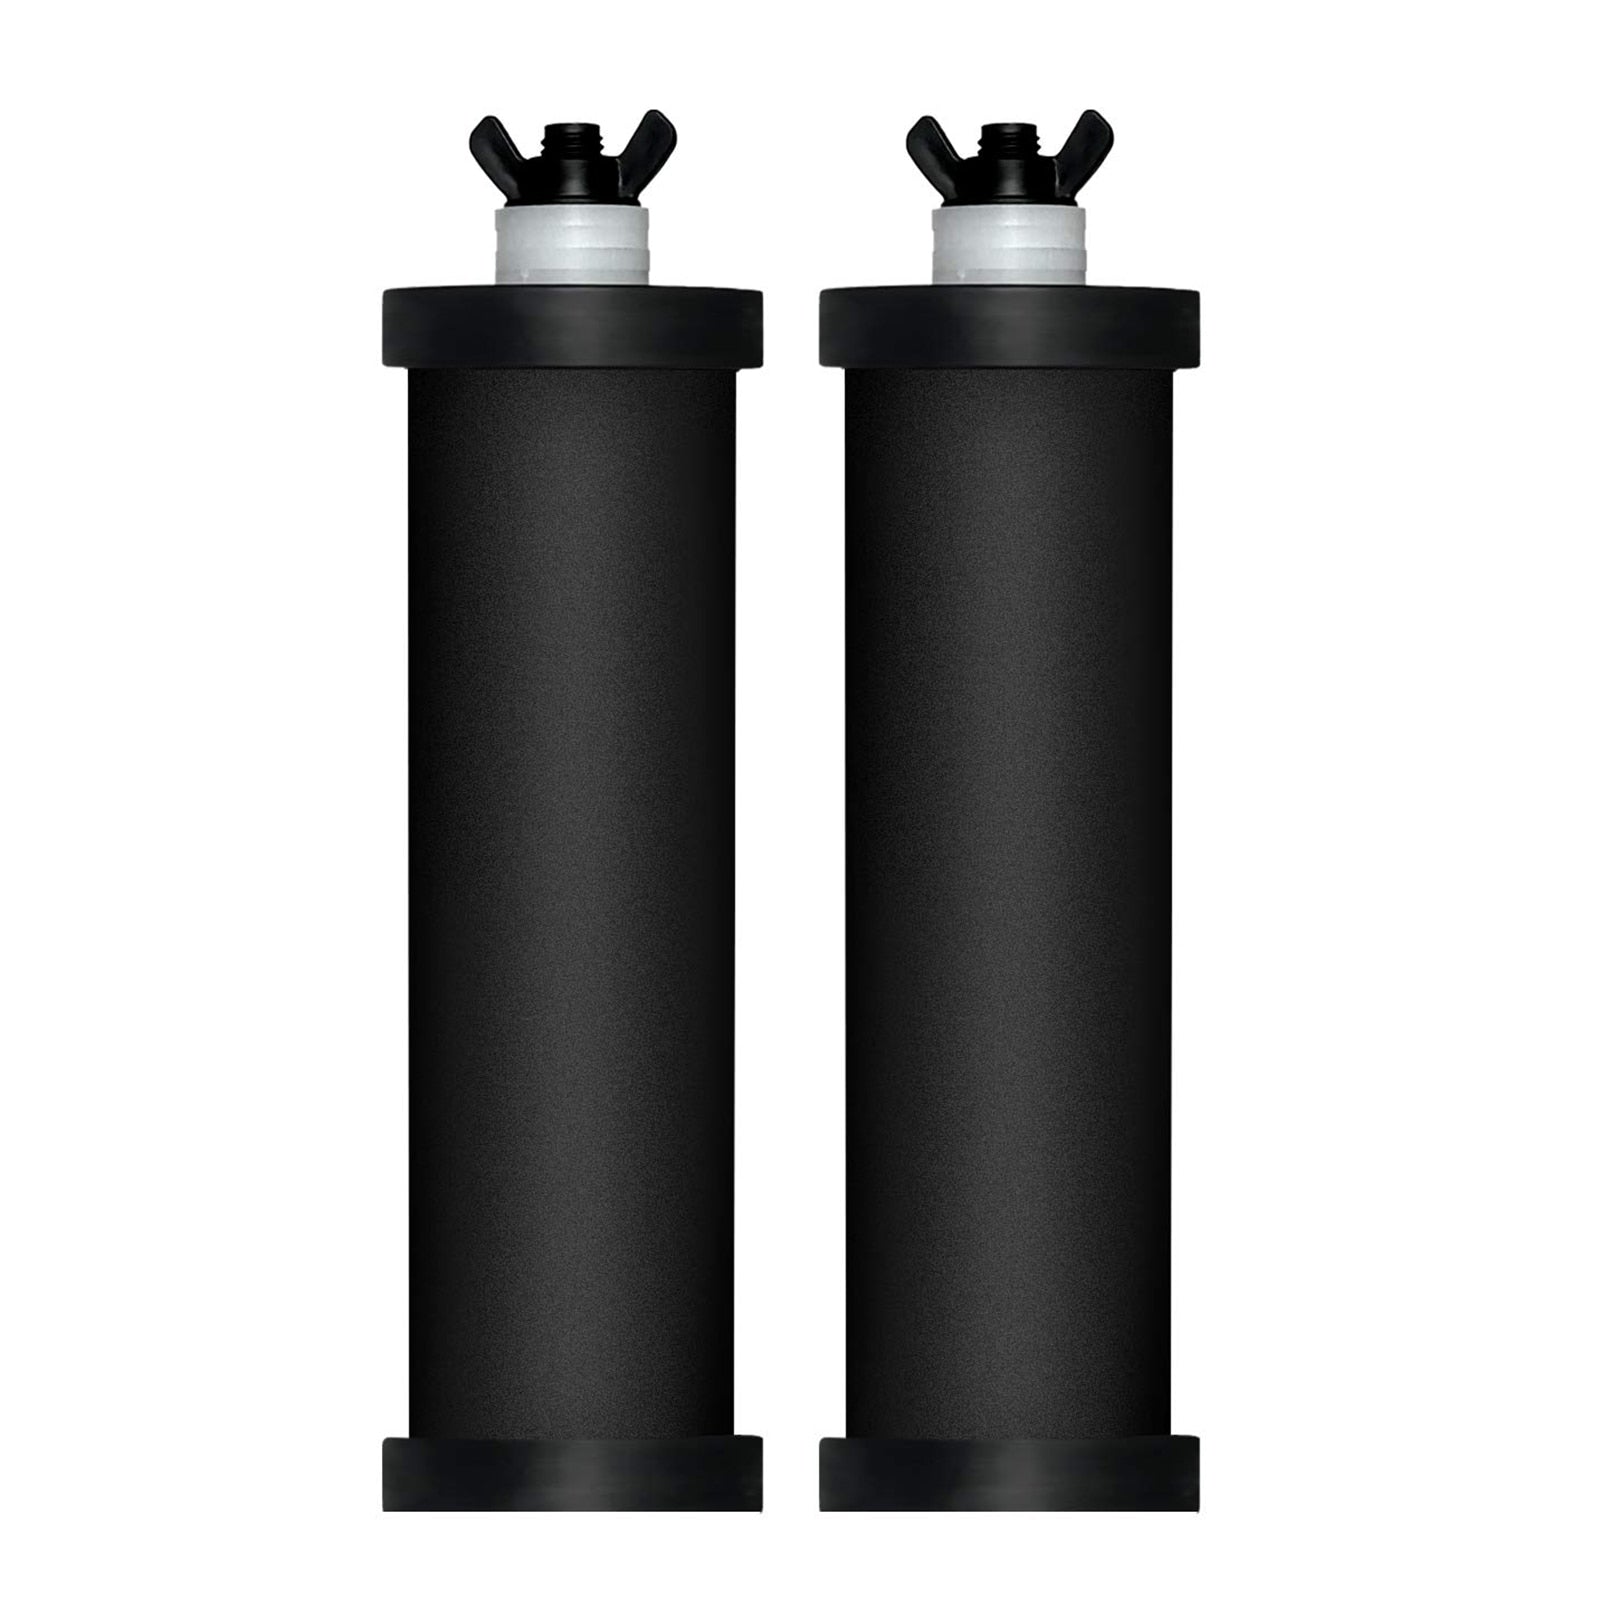 This water filter system with a removable filter can help effectively remove the bacteria to provide clean, safe water. It is perfect for outdoor emergency, camping, hiking, backpacking, etc.